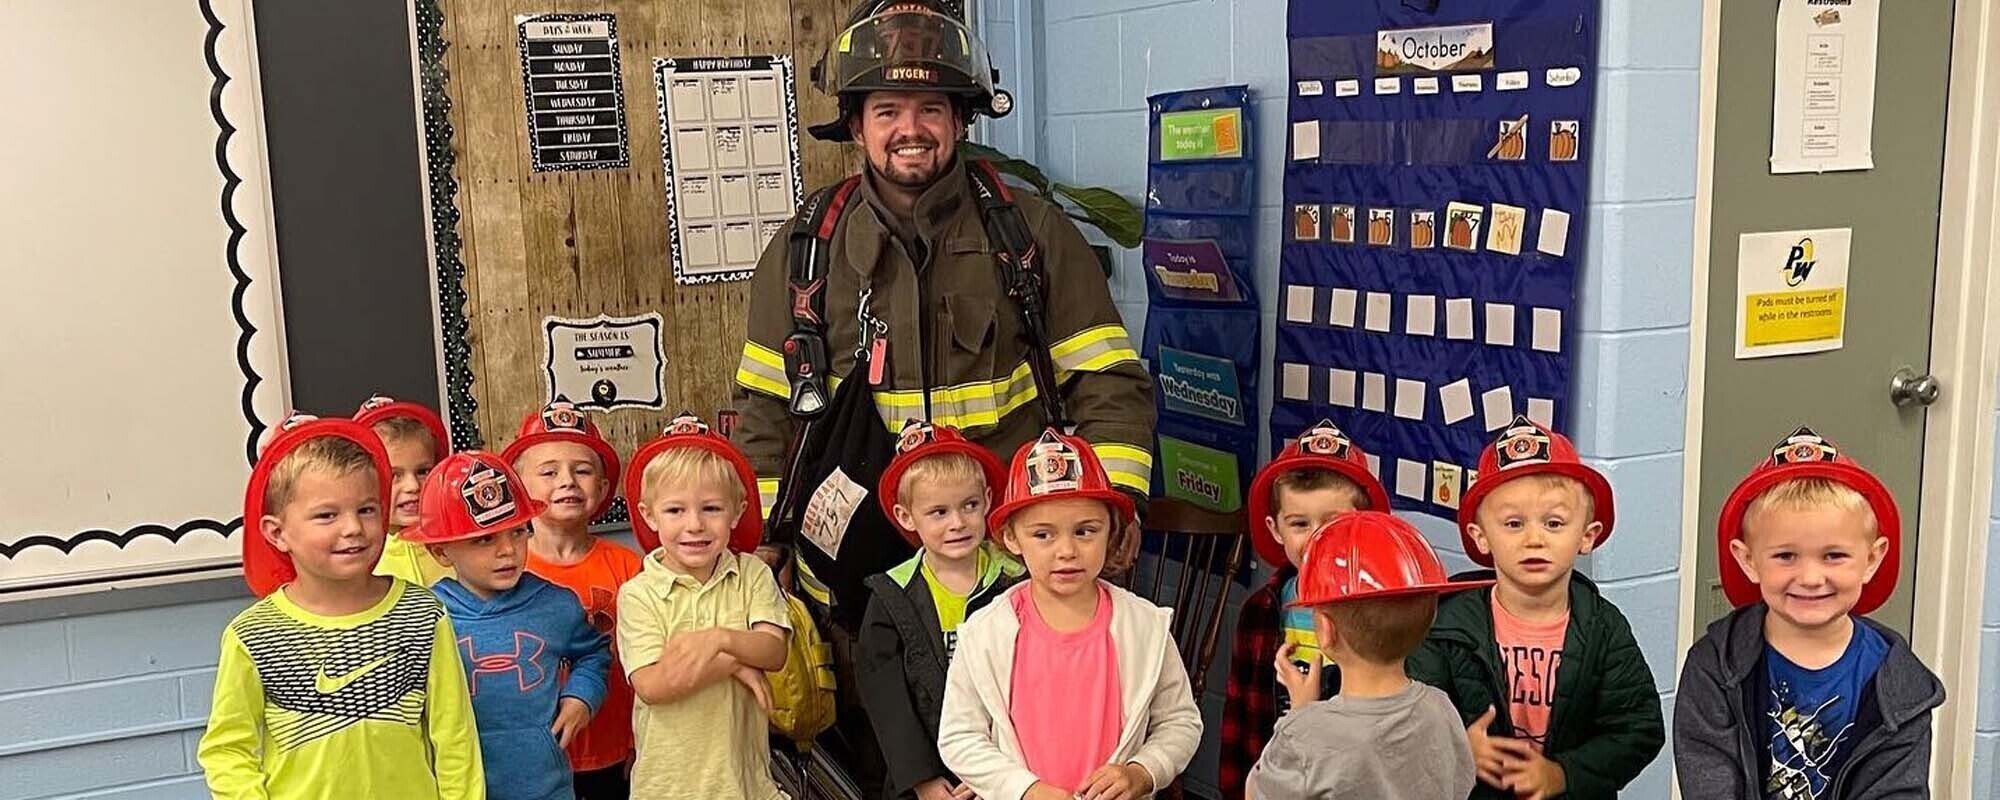 Elementary Students with Firefighter